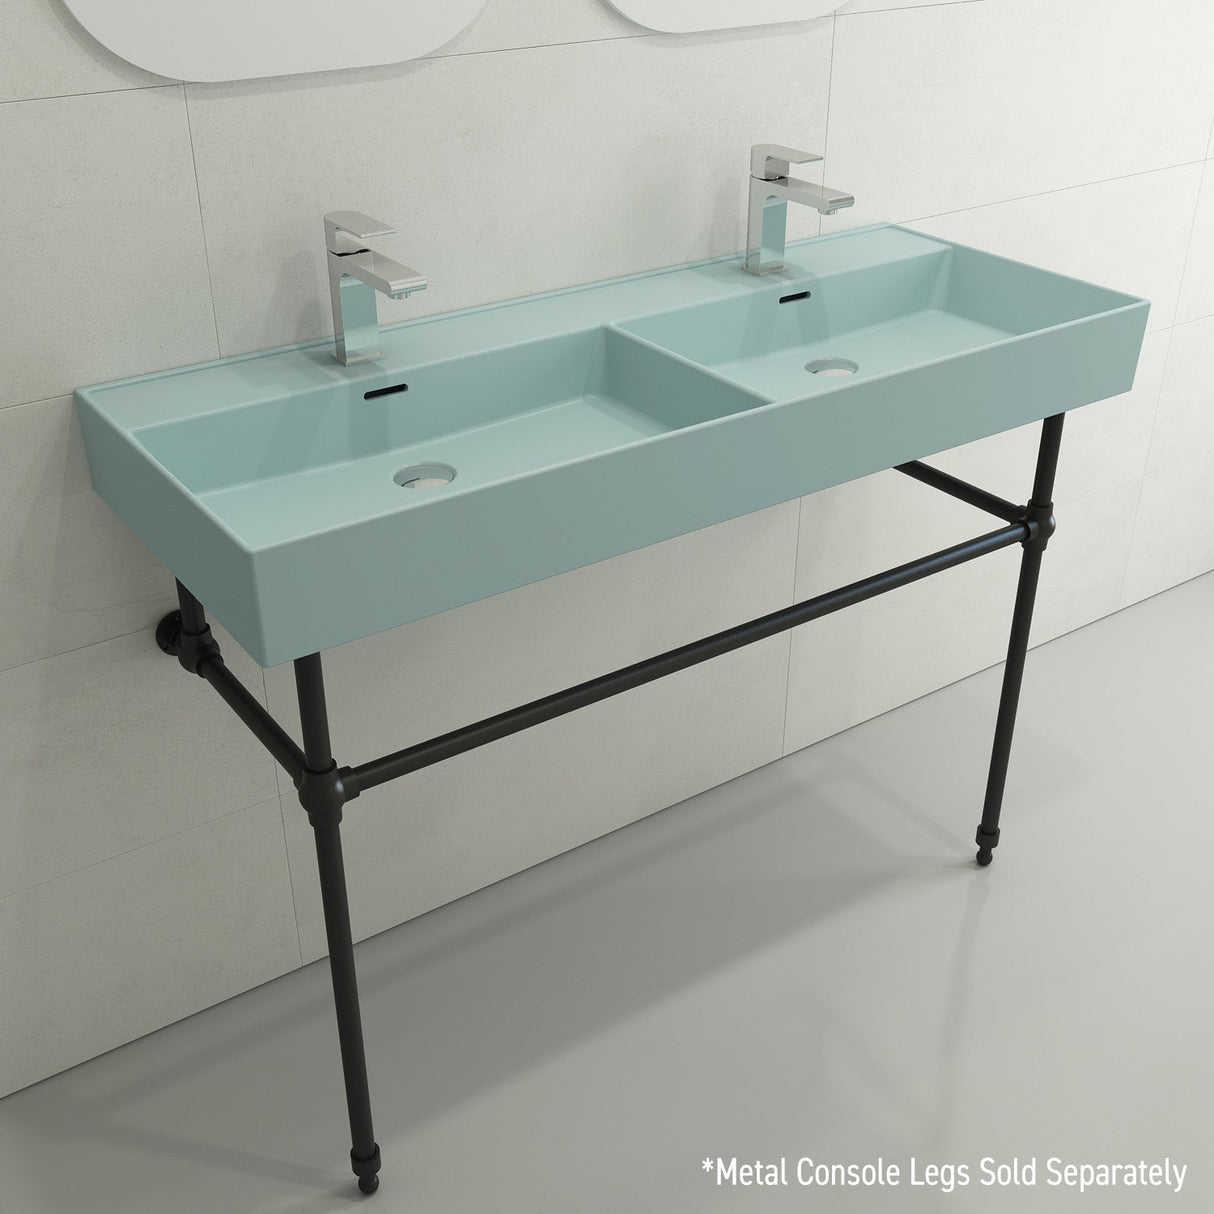 BOCCHI 1393-029-0132 Milano Wall-Mounted Sink Fireclay  47.75 in. Double Bowl for Two 1-Hole Faucets with Overflows in Matte Ice Blue